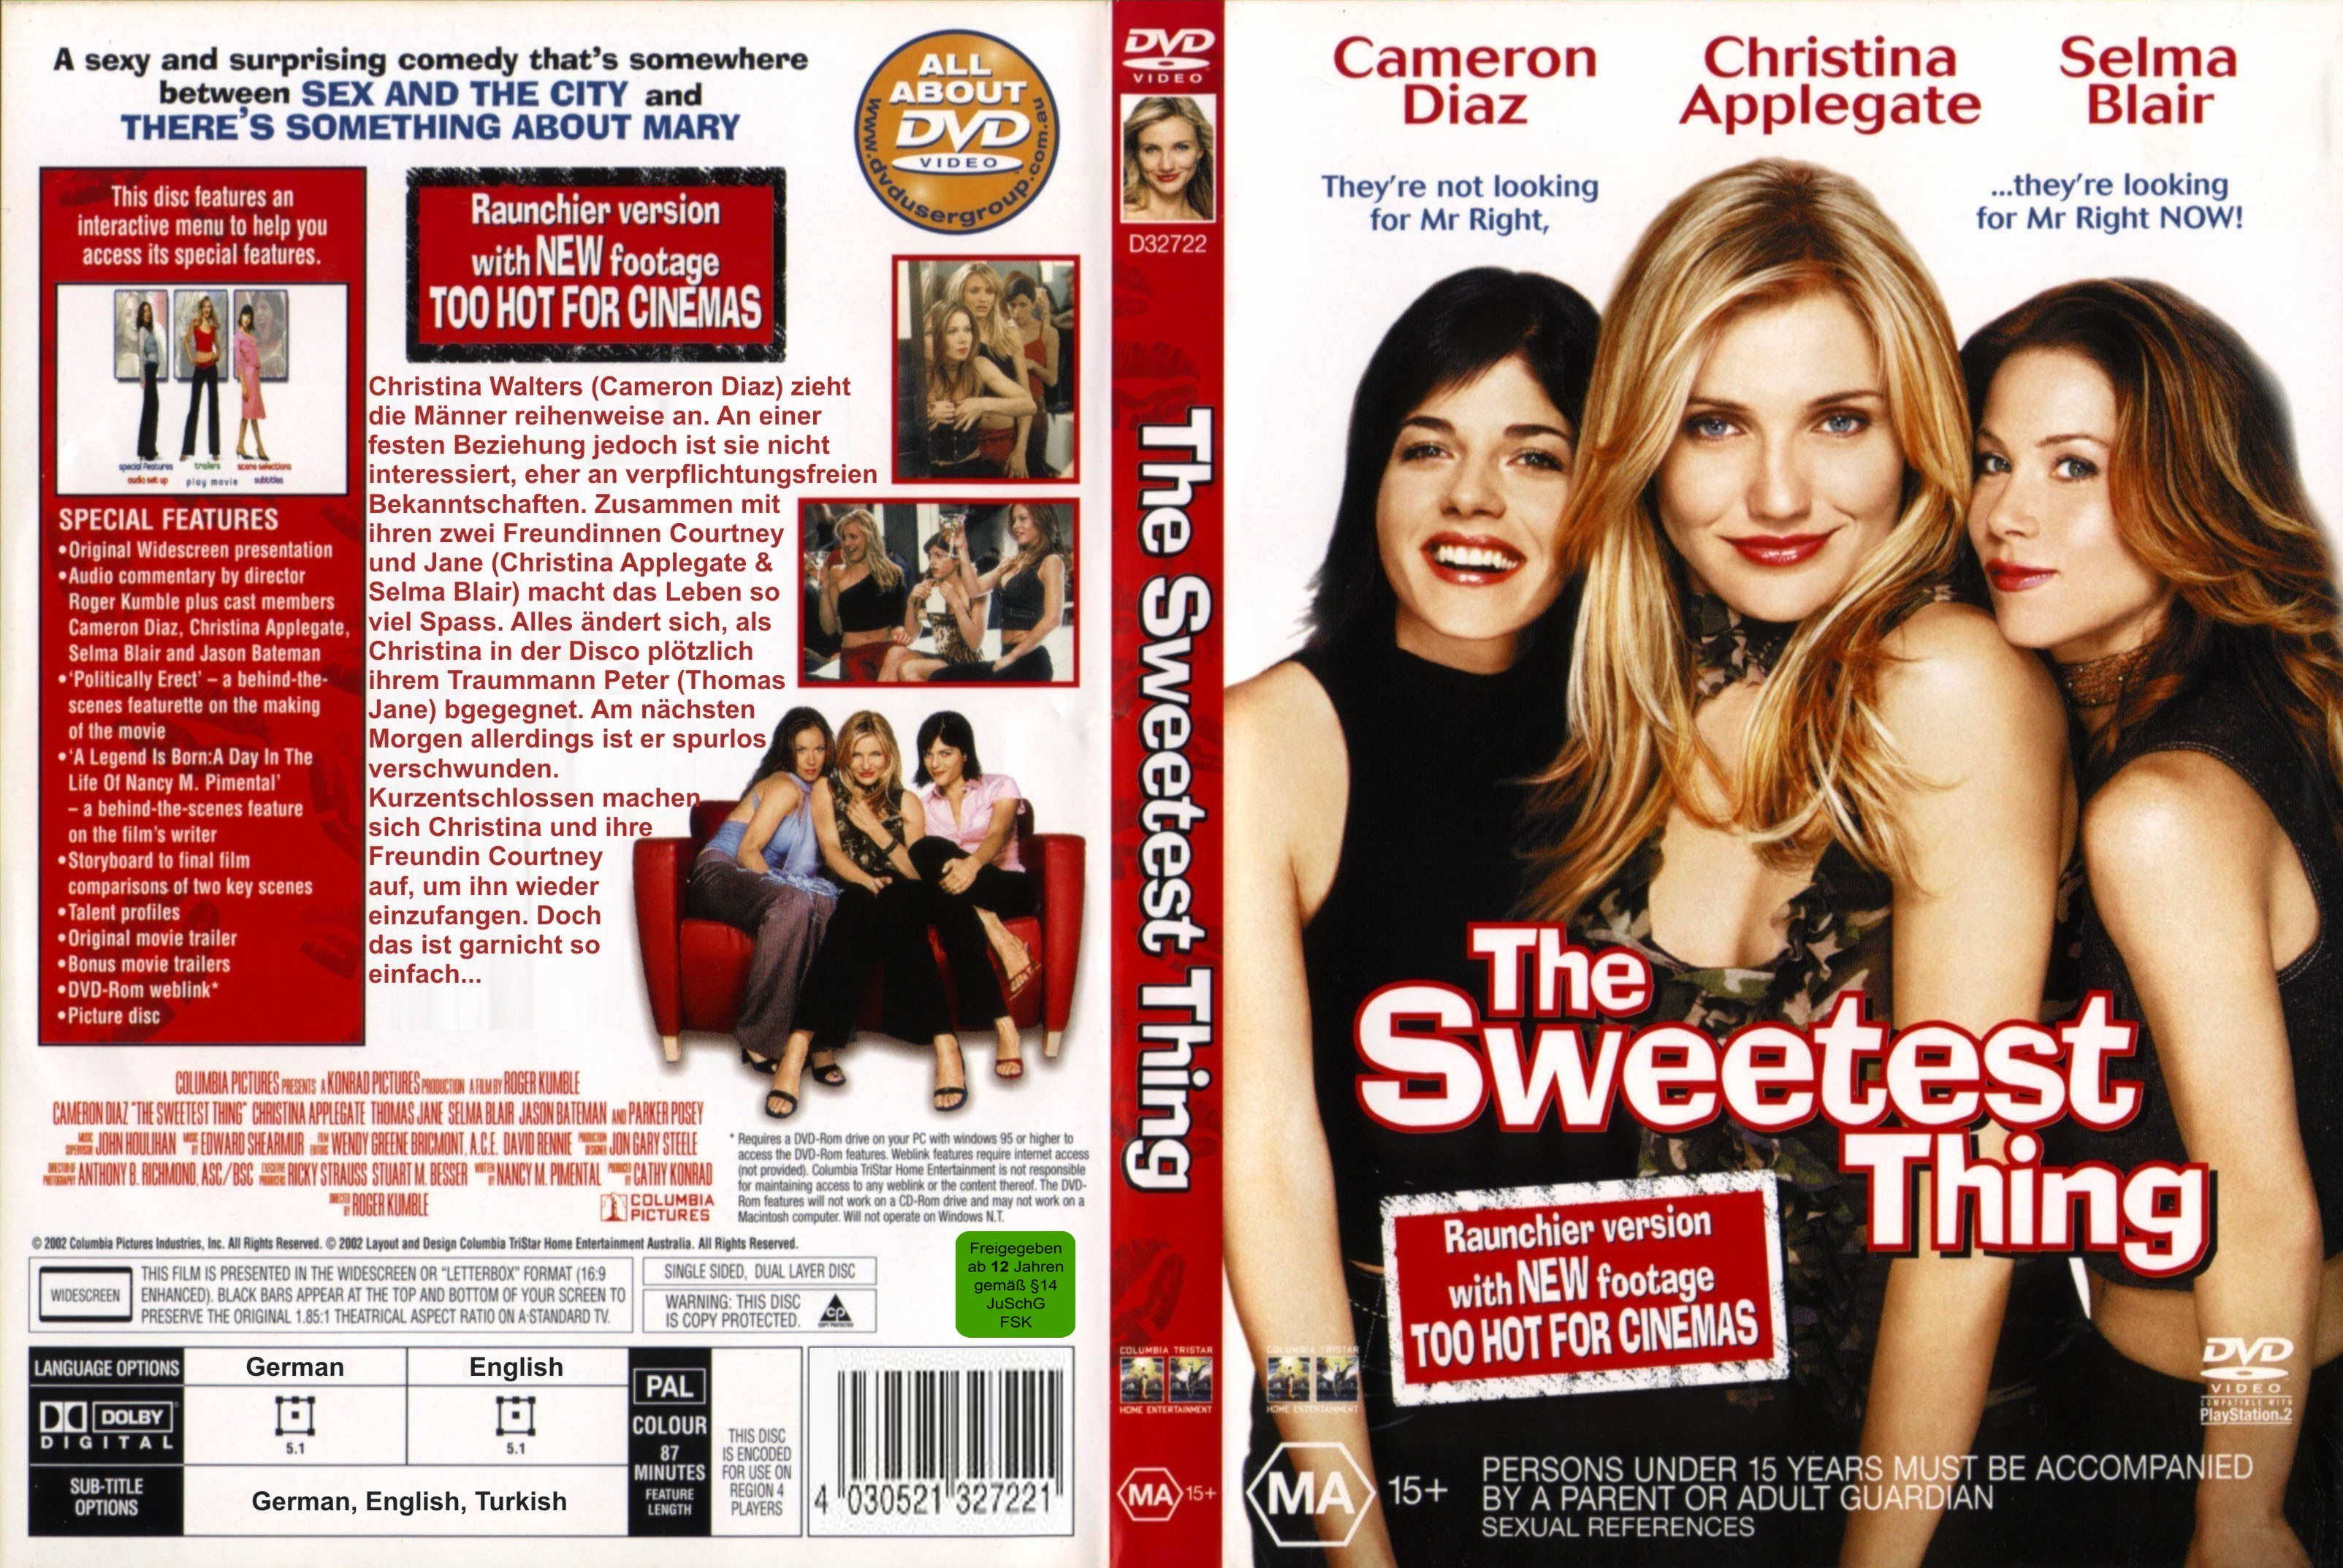 The Sweetest Thing - DVD